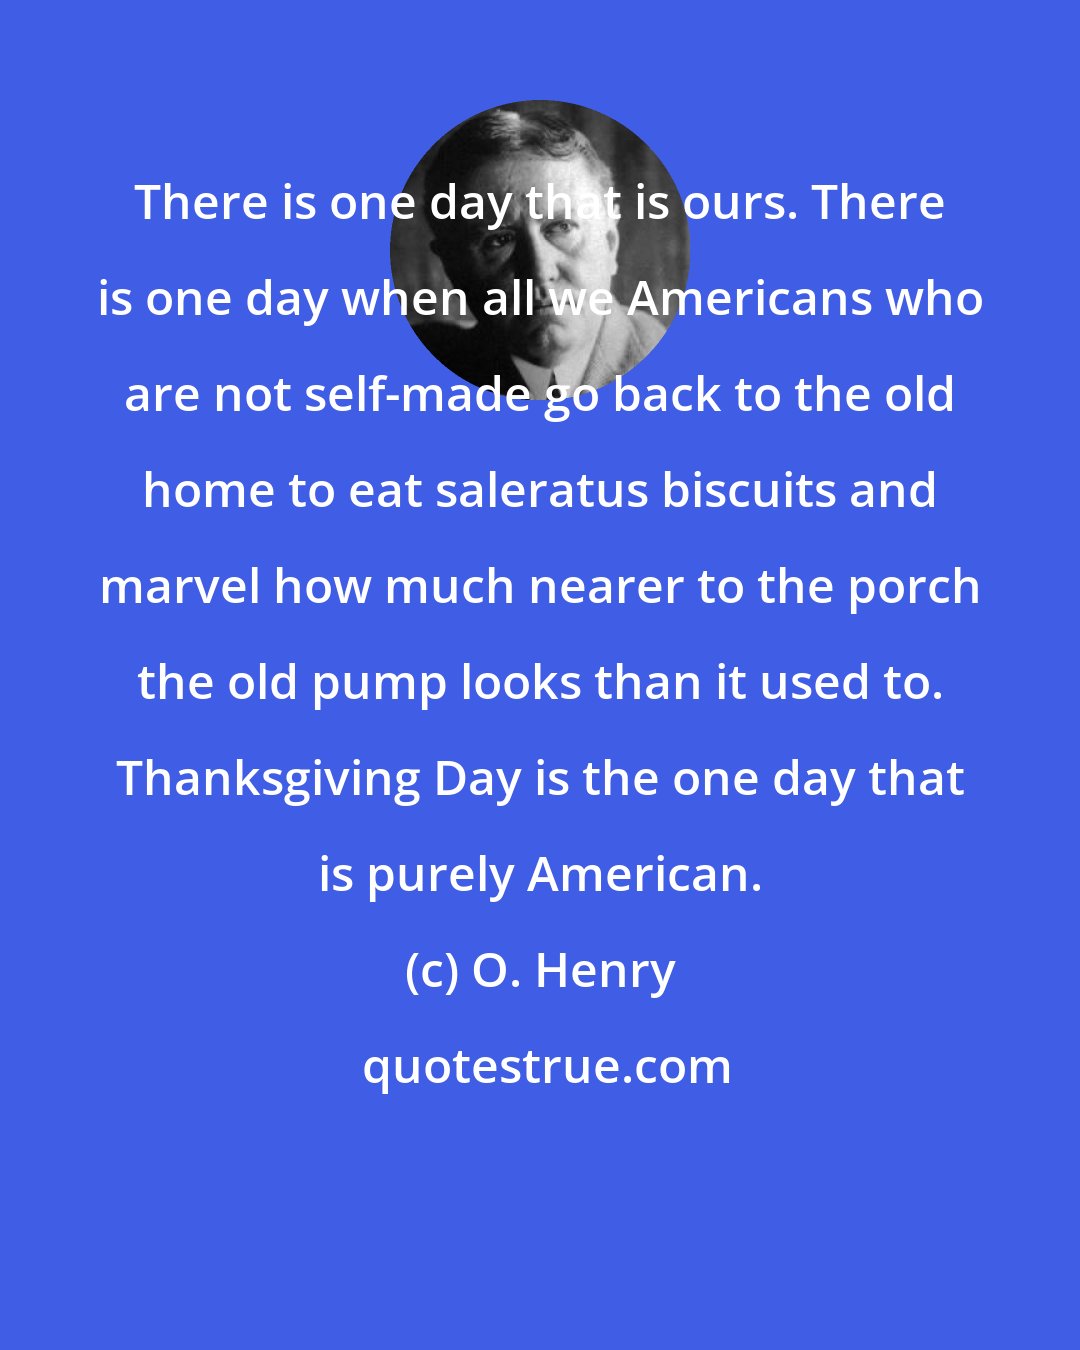 O. Henry: There is one day that is ours. There is one day when all we Americans who are not self-made go back to the old home to eat saleratus biscuits and marvel how much nearer to the porch the old pump looks than it used to. Thanksgiving Day is the one day that is purely American.